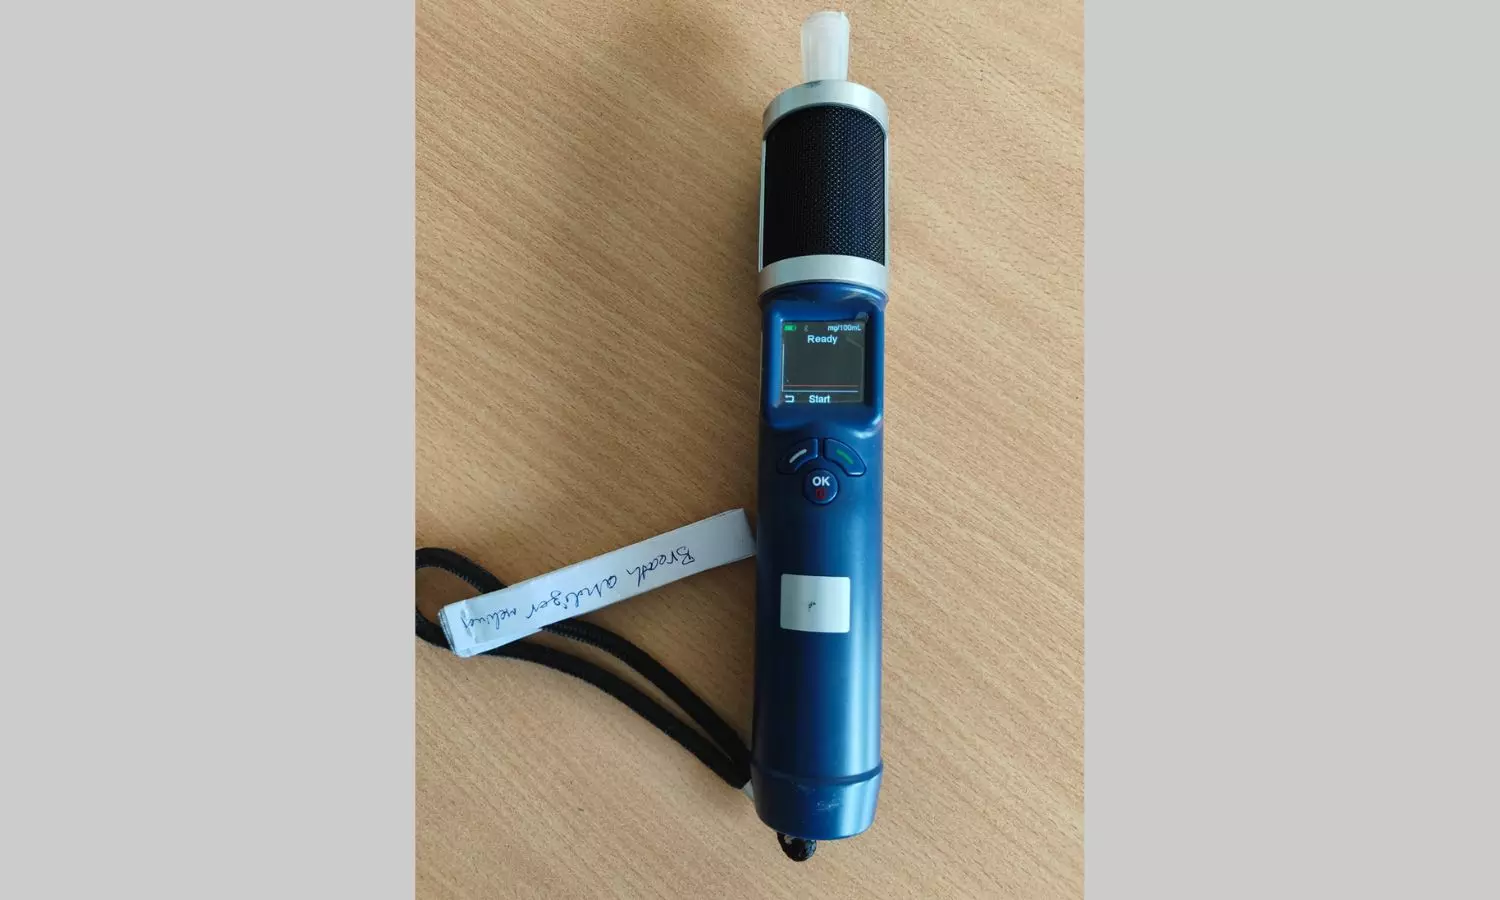 Man held for snatching breath analyser from Hyderabad traffic police